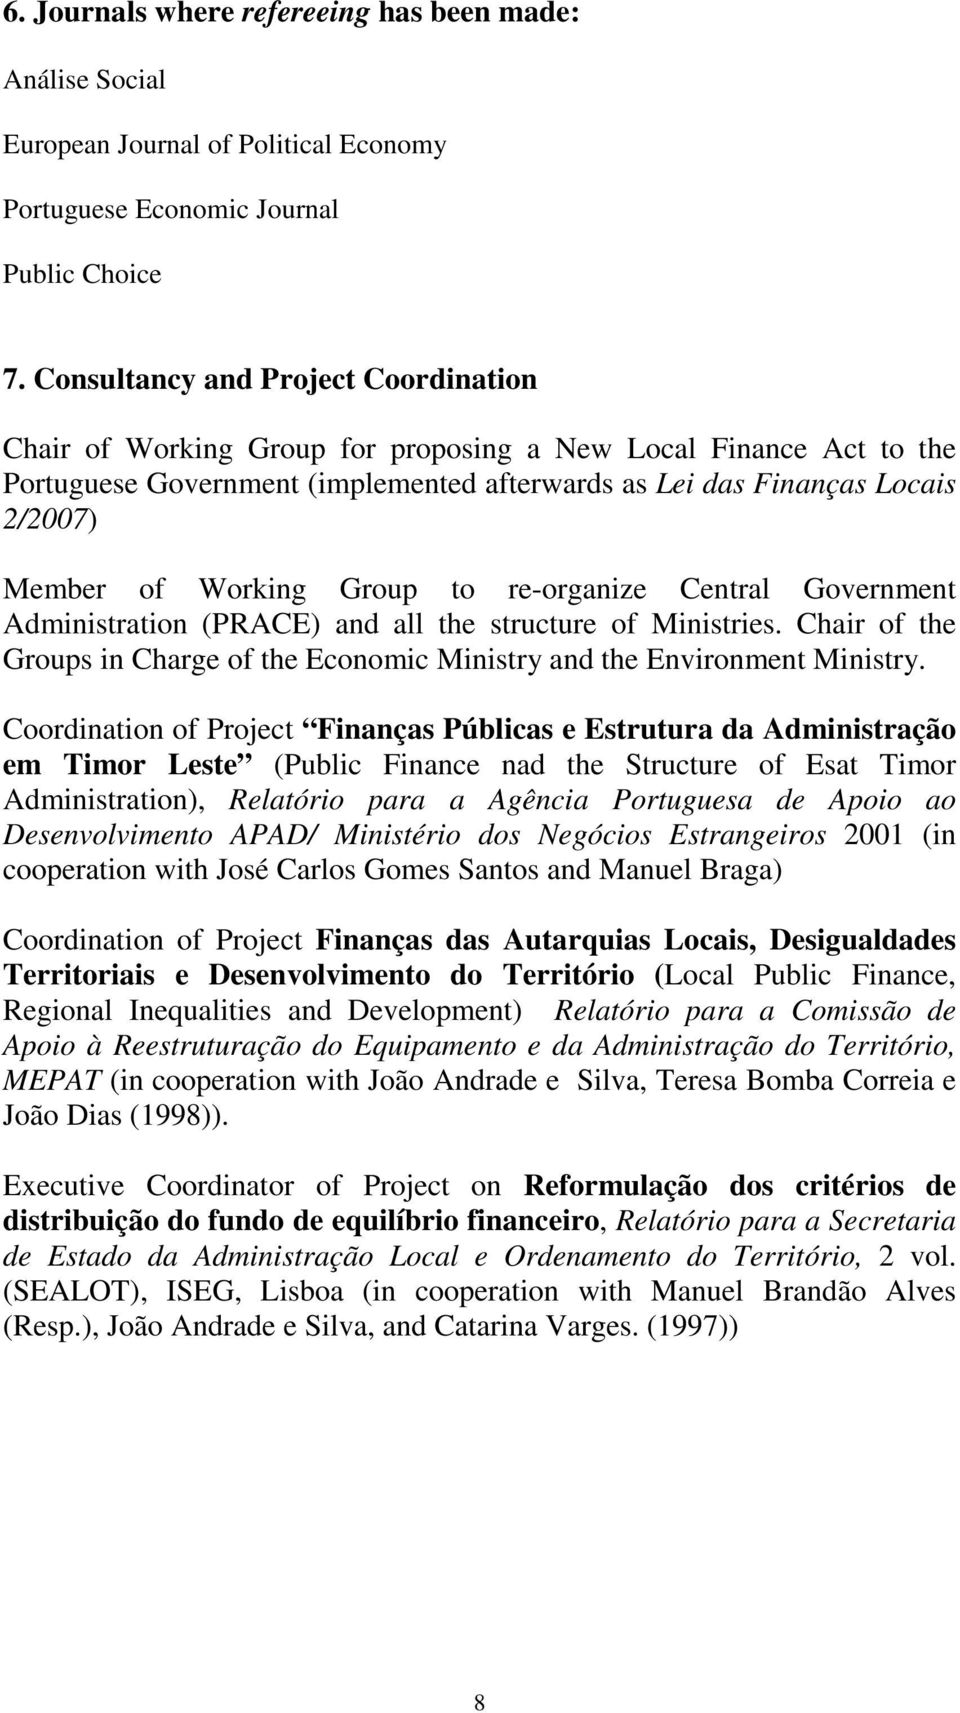 Working Group to re-organize Central Government Administration (PRACE) and all the structure of Ministries. Chair of the Groups in Charge of the Economic Ministry and the Environment Ministry.